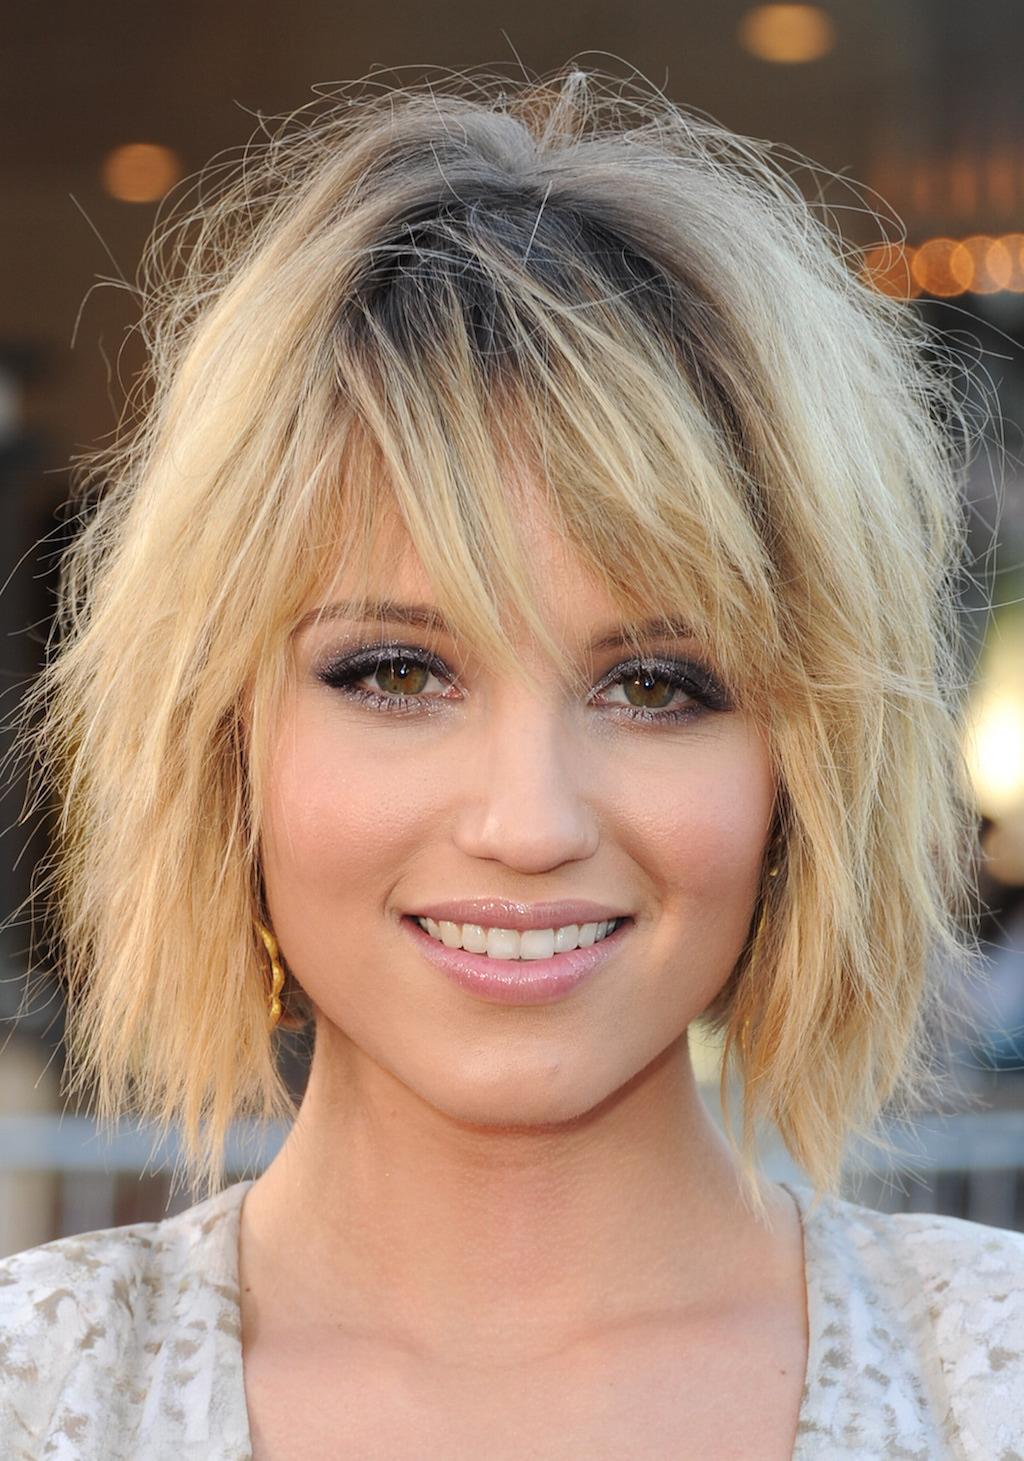  short-hairstyles-for-oval-faces-and-fine-hair-hair-styles-for-oval-faces-hair